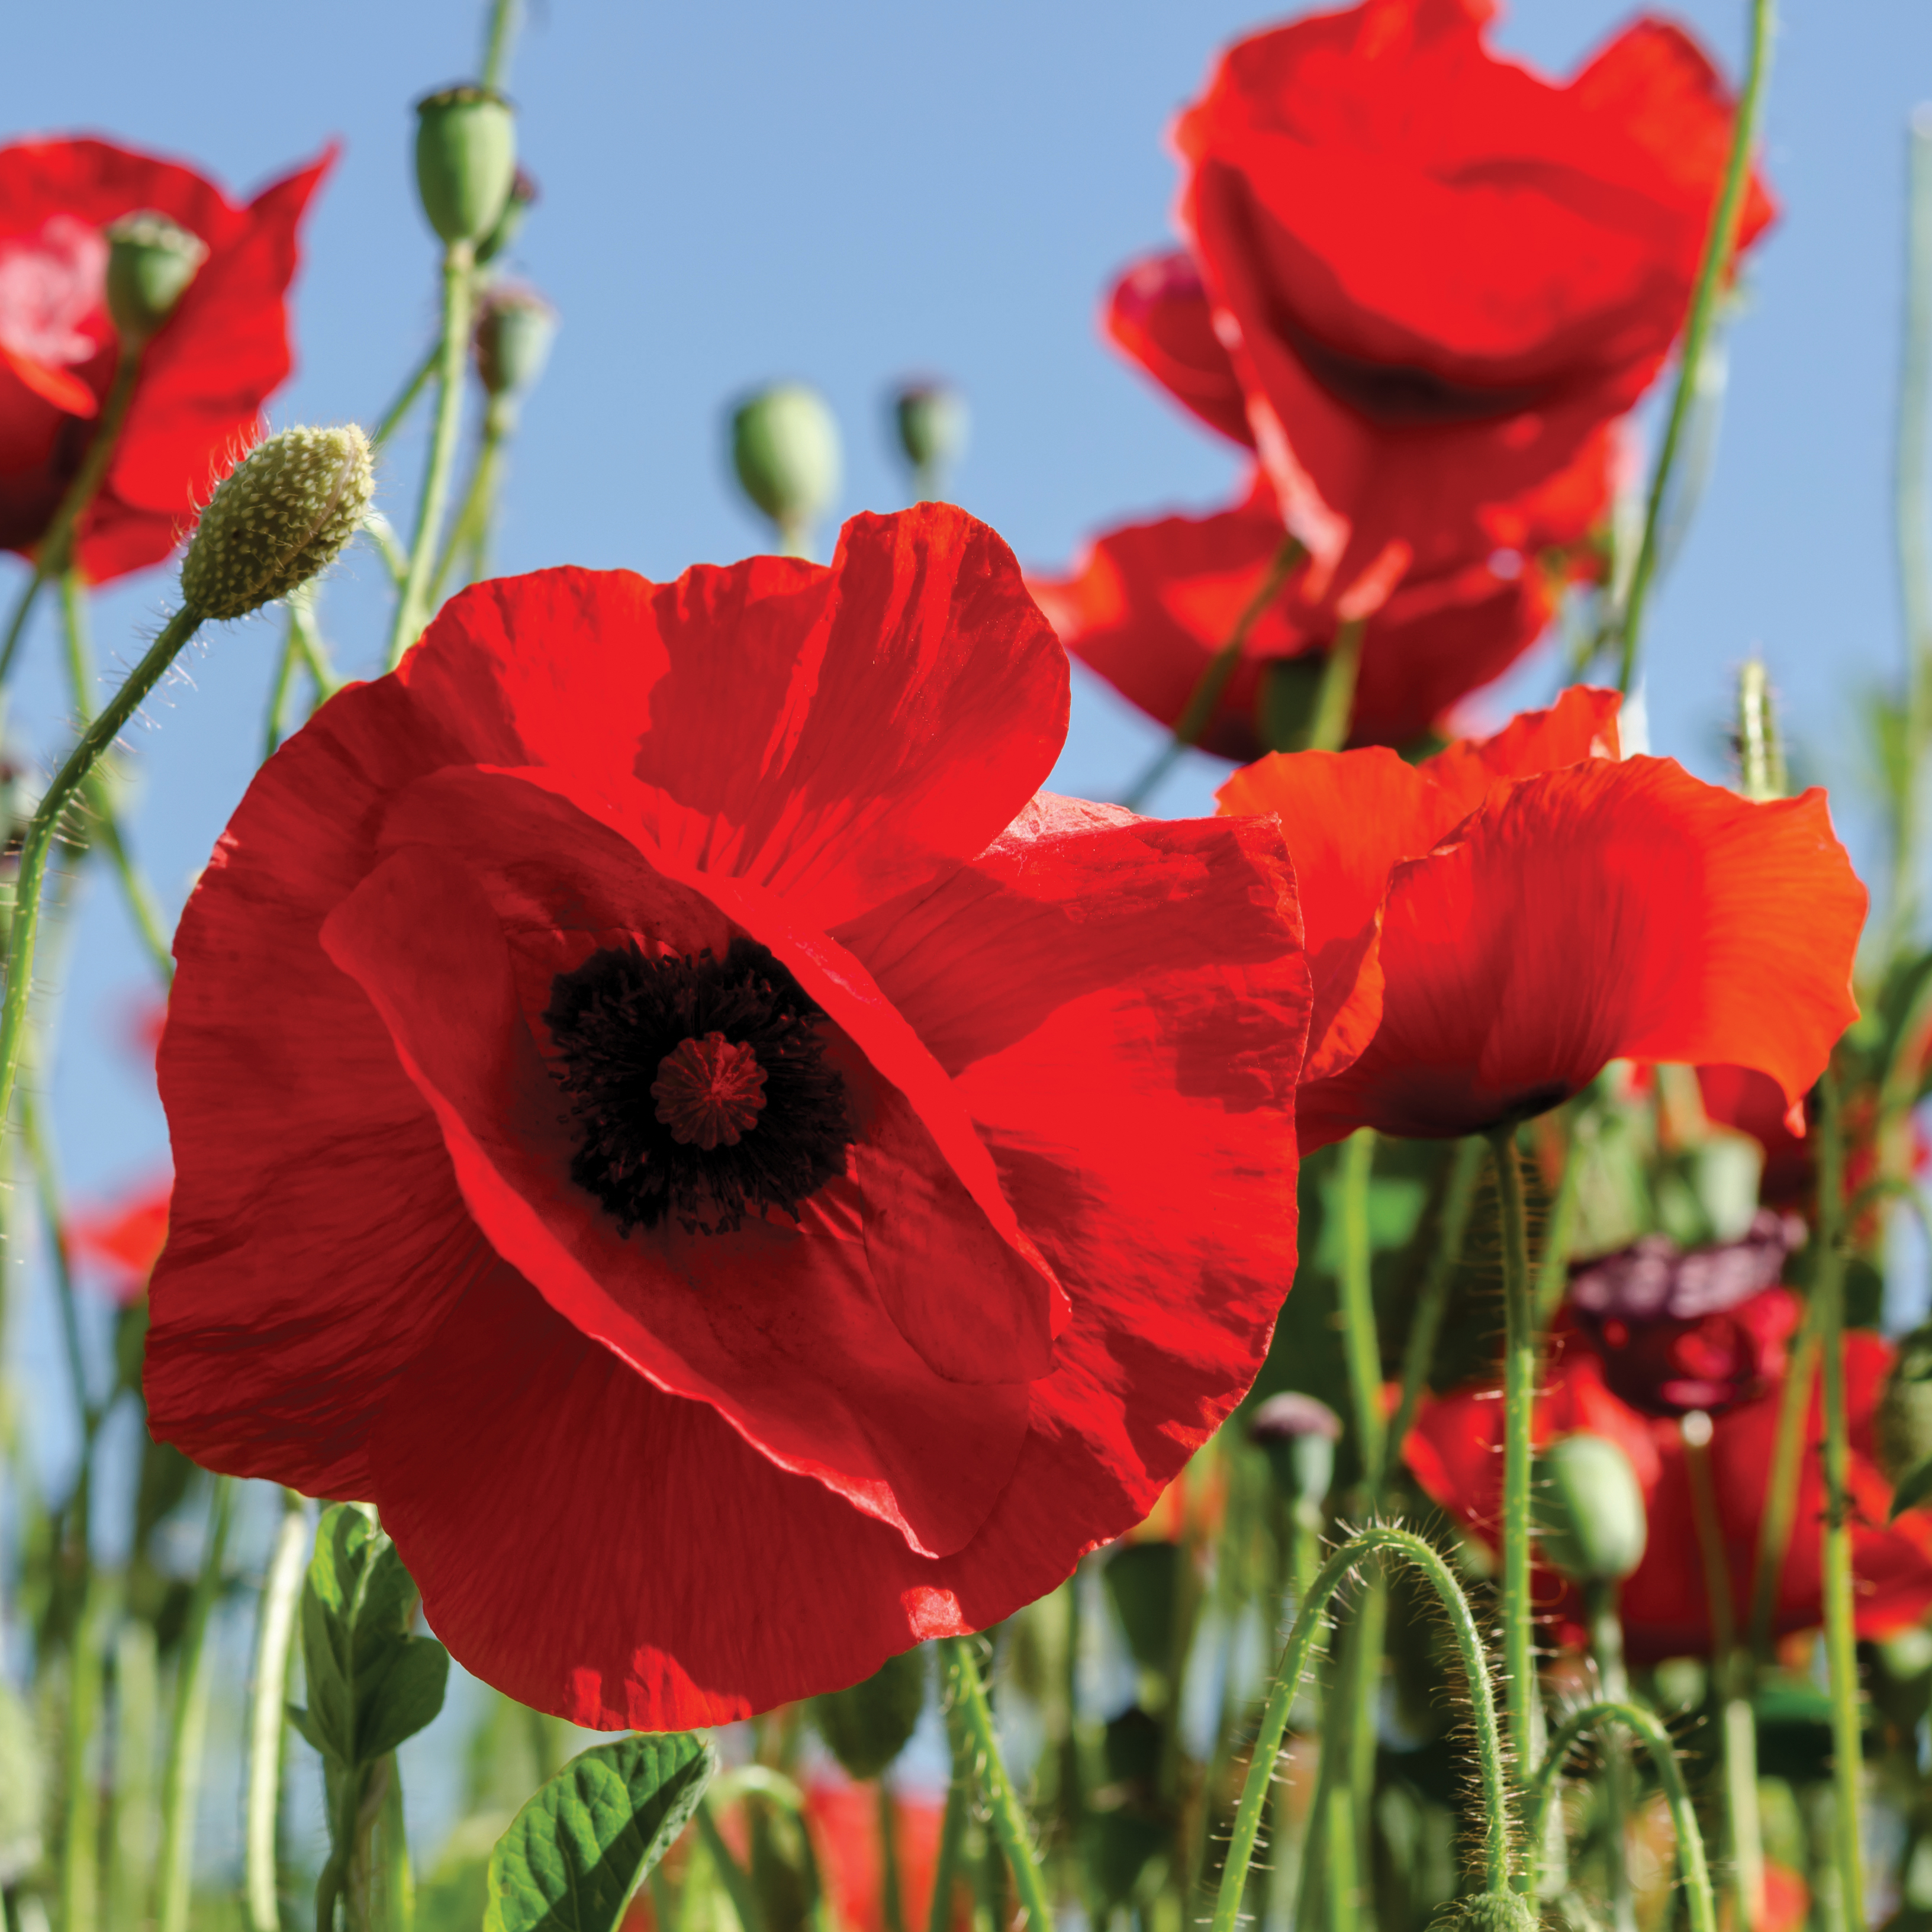 Using poppy funds to help our military families